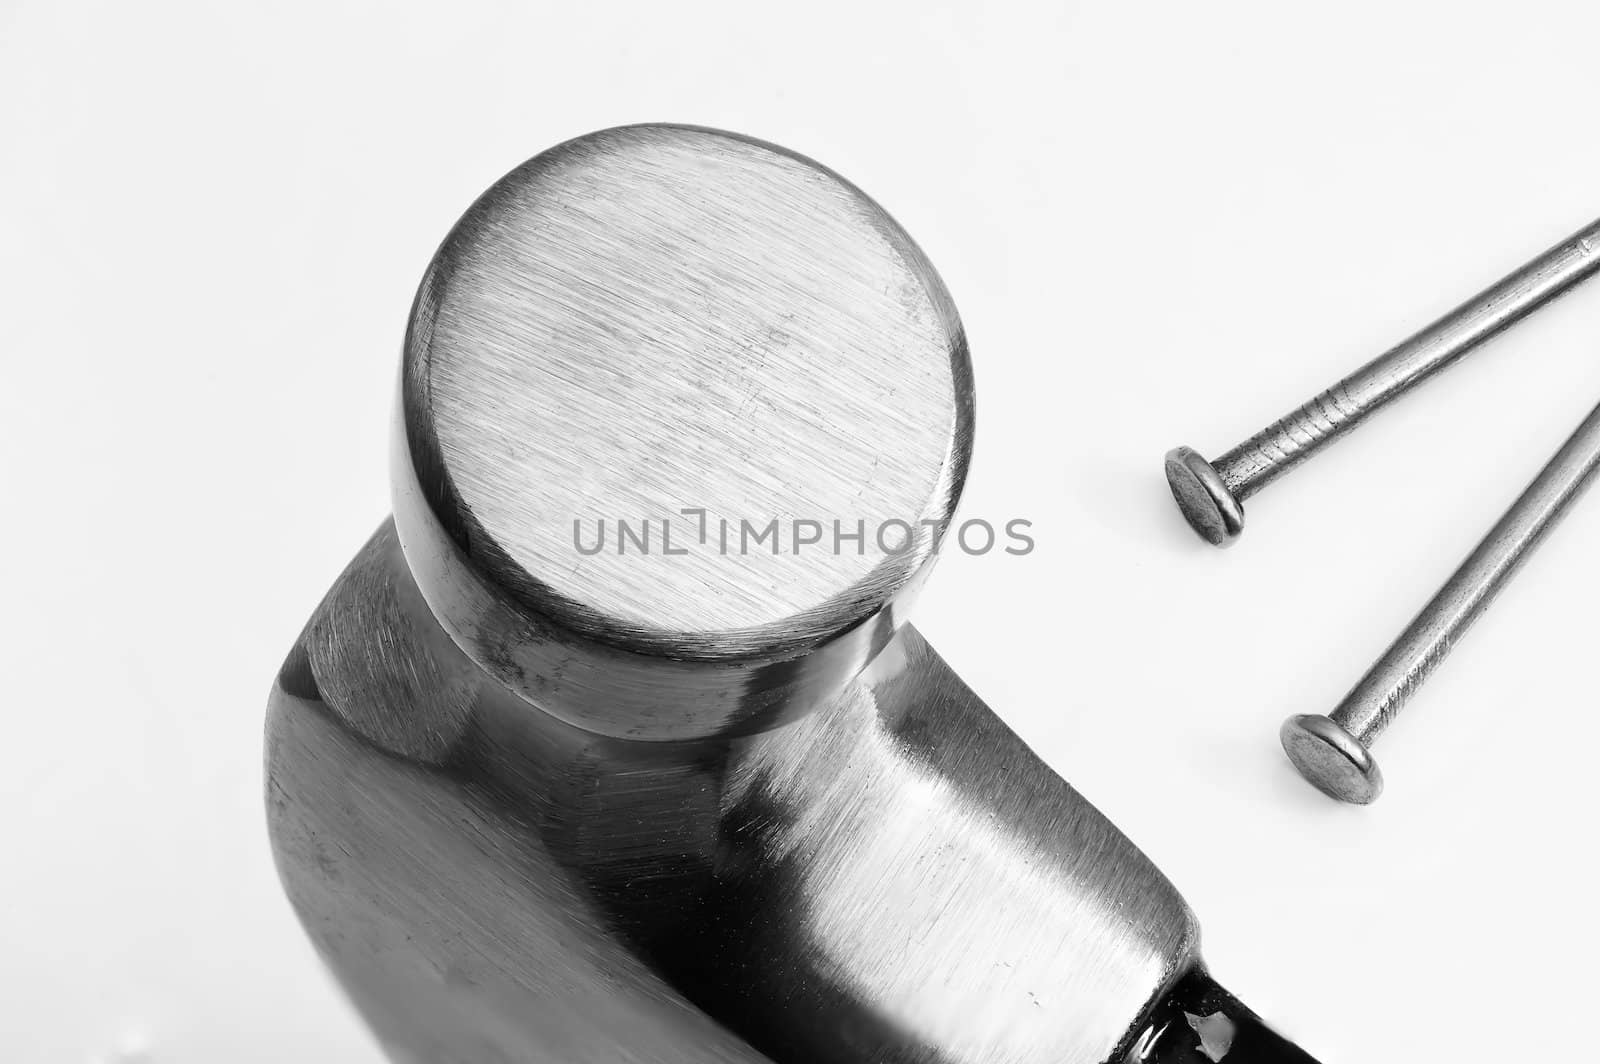 Nails and Hammer up Close by wolterk